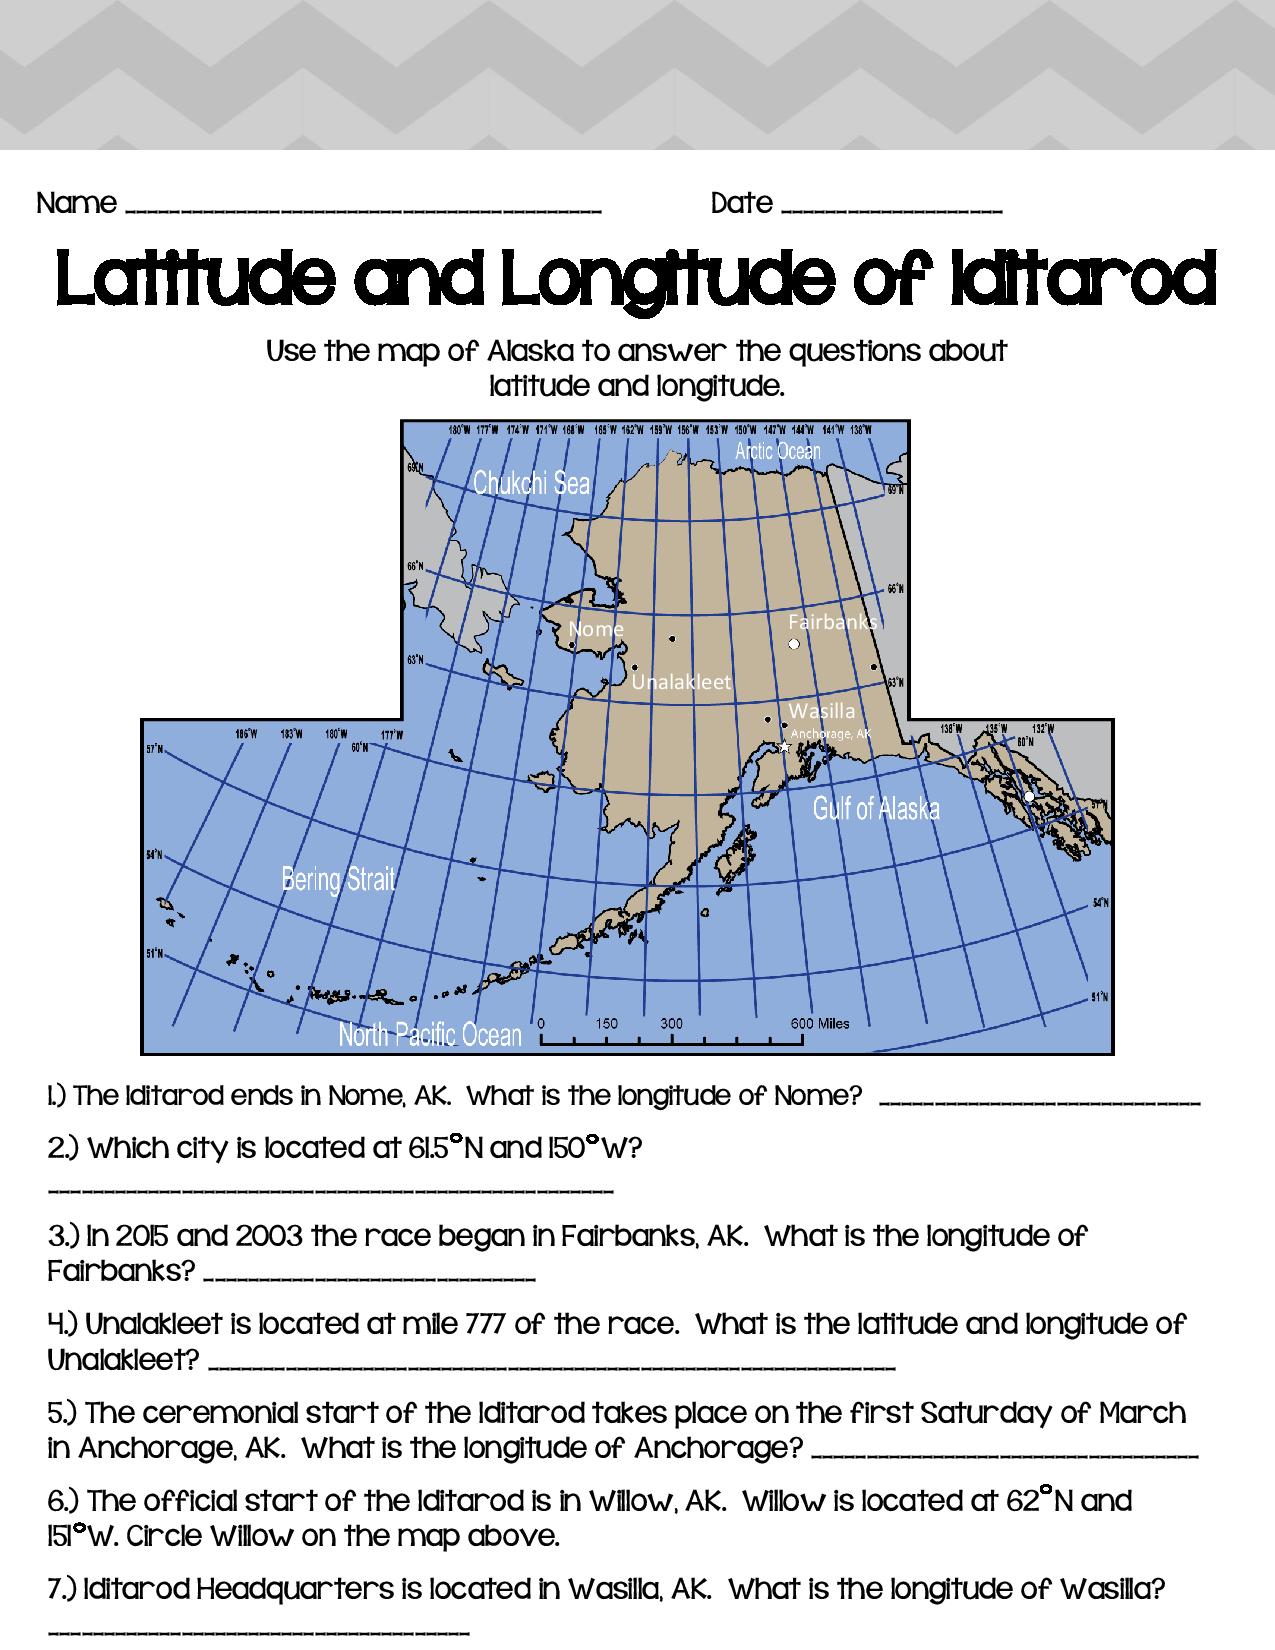 lat-and-long-of-iditarod-handout-page-001